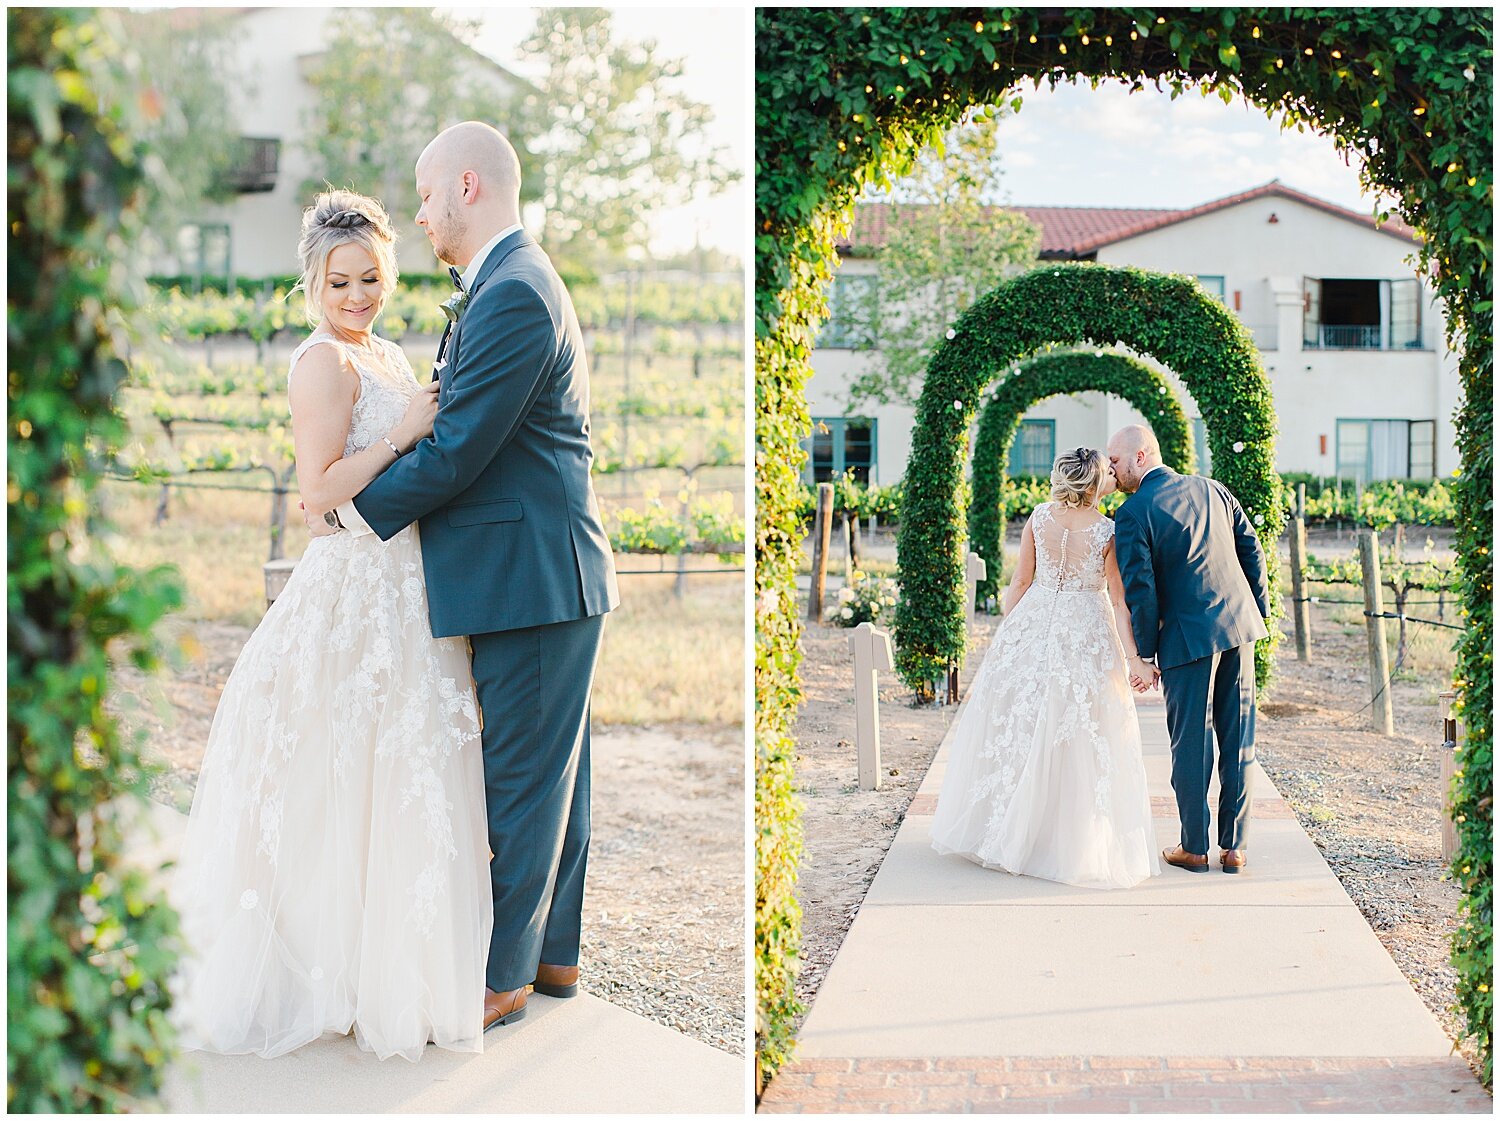  Ponte Winery wedding, romantic Temecula winery wedding, Temecula wine country wedding, Temecula wedding photographers, southern California wedding photographers, Ponte winery wedding photography, bride and groom photos at sunset in vineyard at Ponte